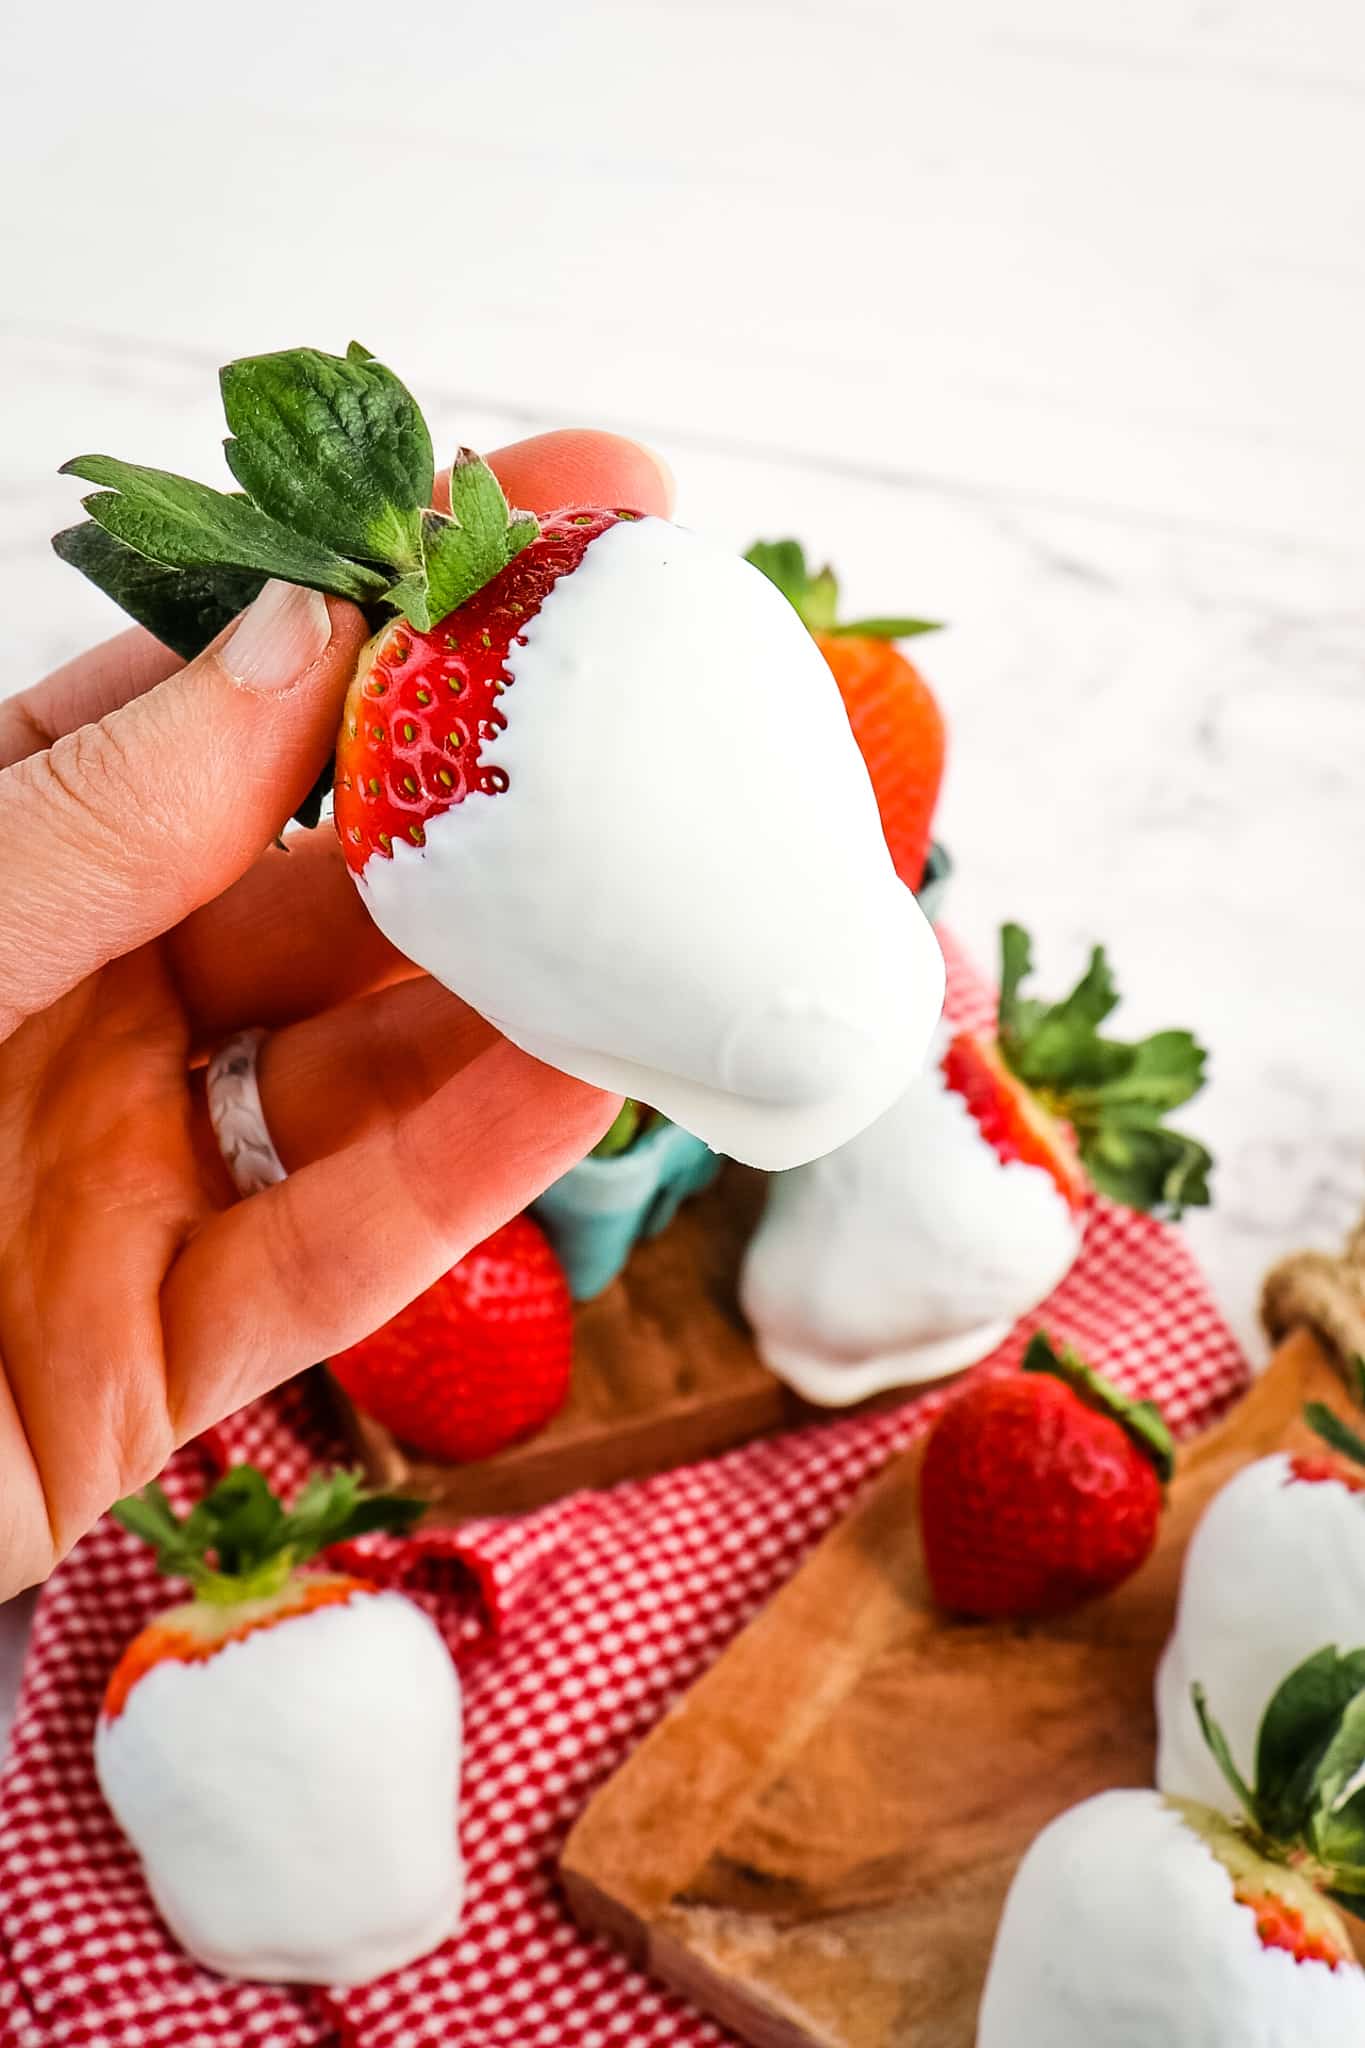 White chocolate covered strawberry being held in hand.